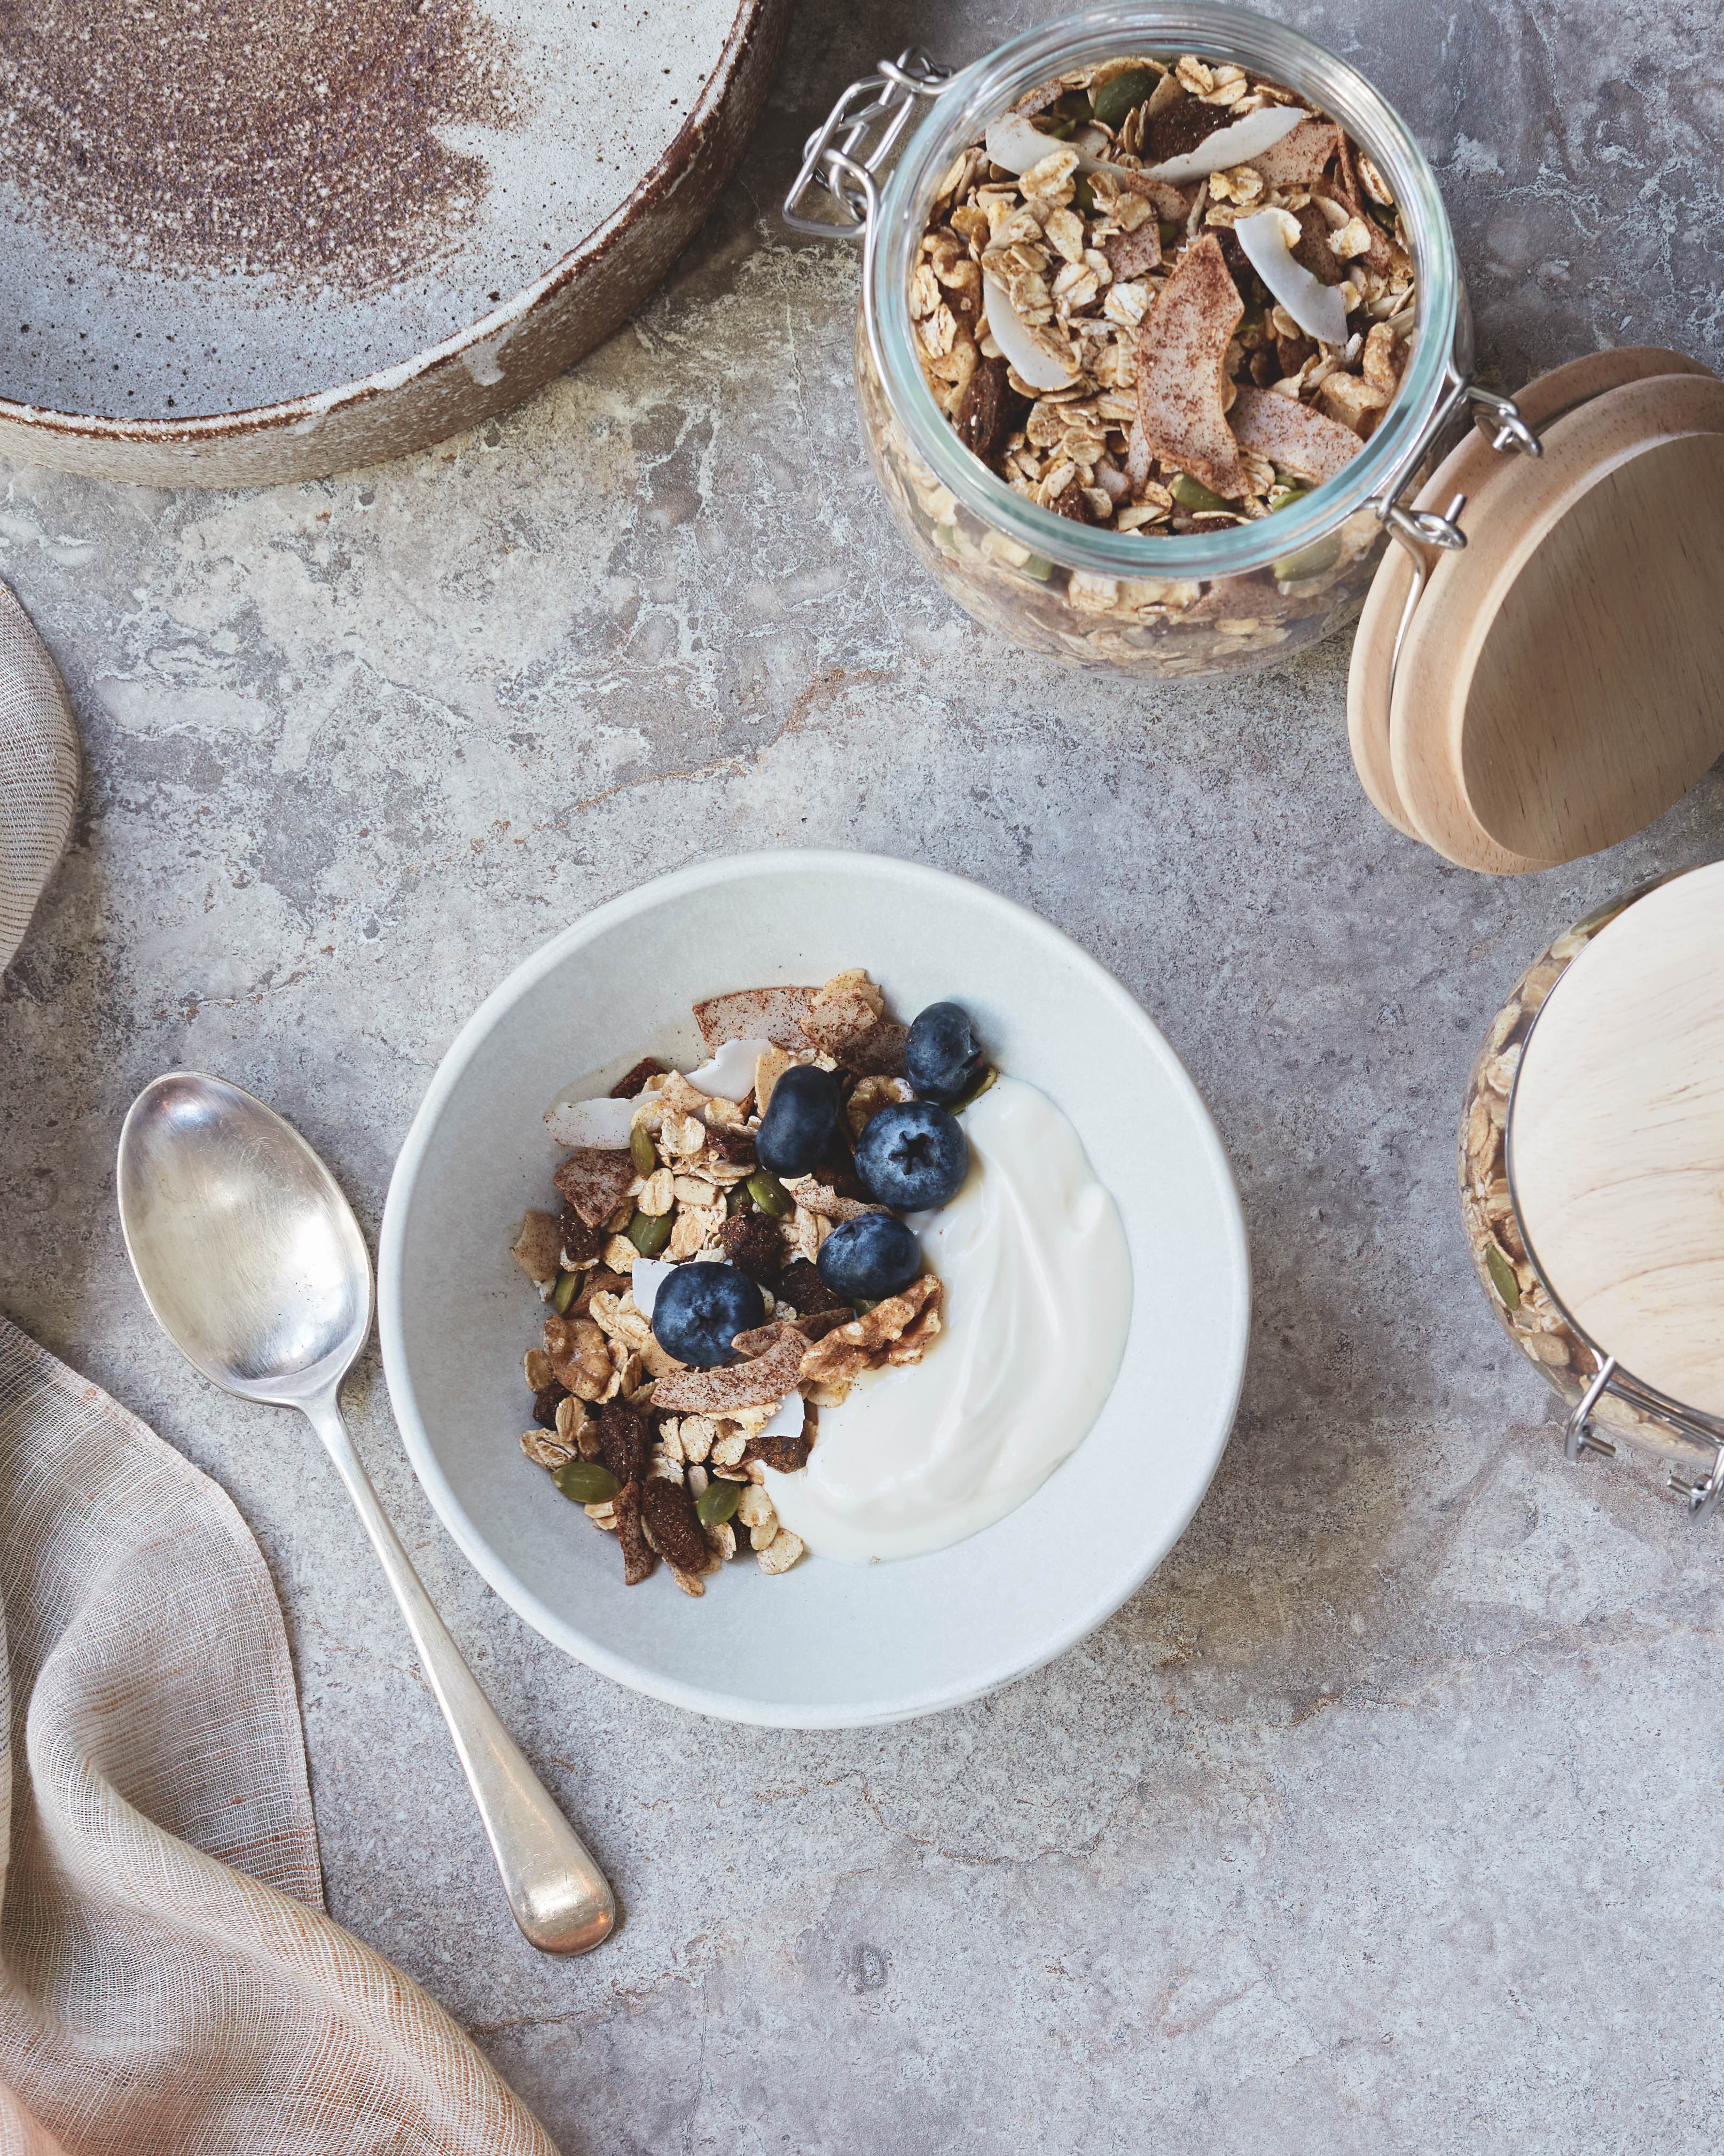 Homemade Muesli - By Kelly Healey, as published in Eat for Life